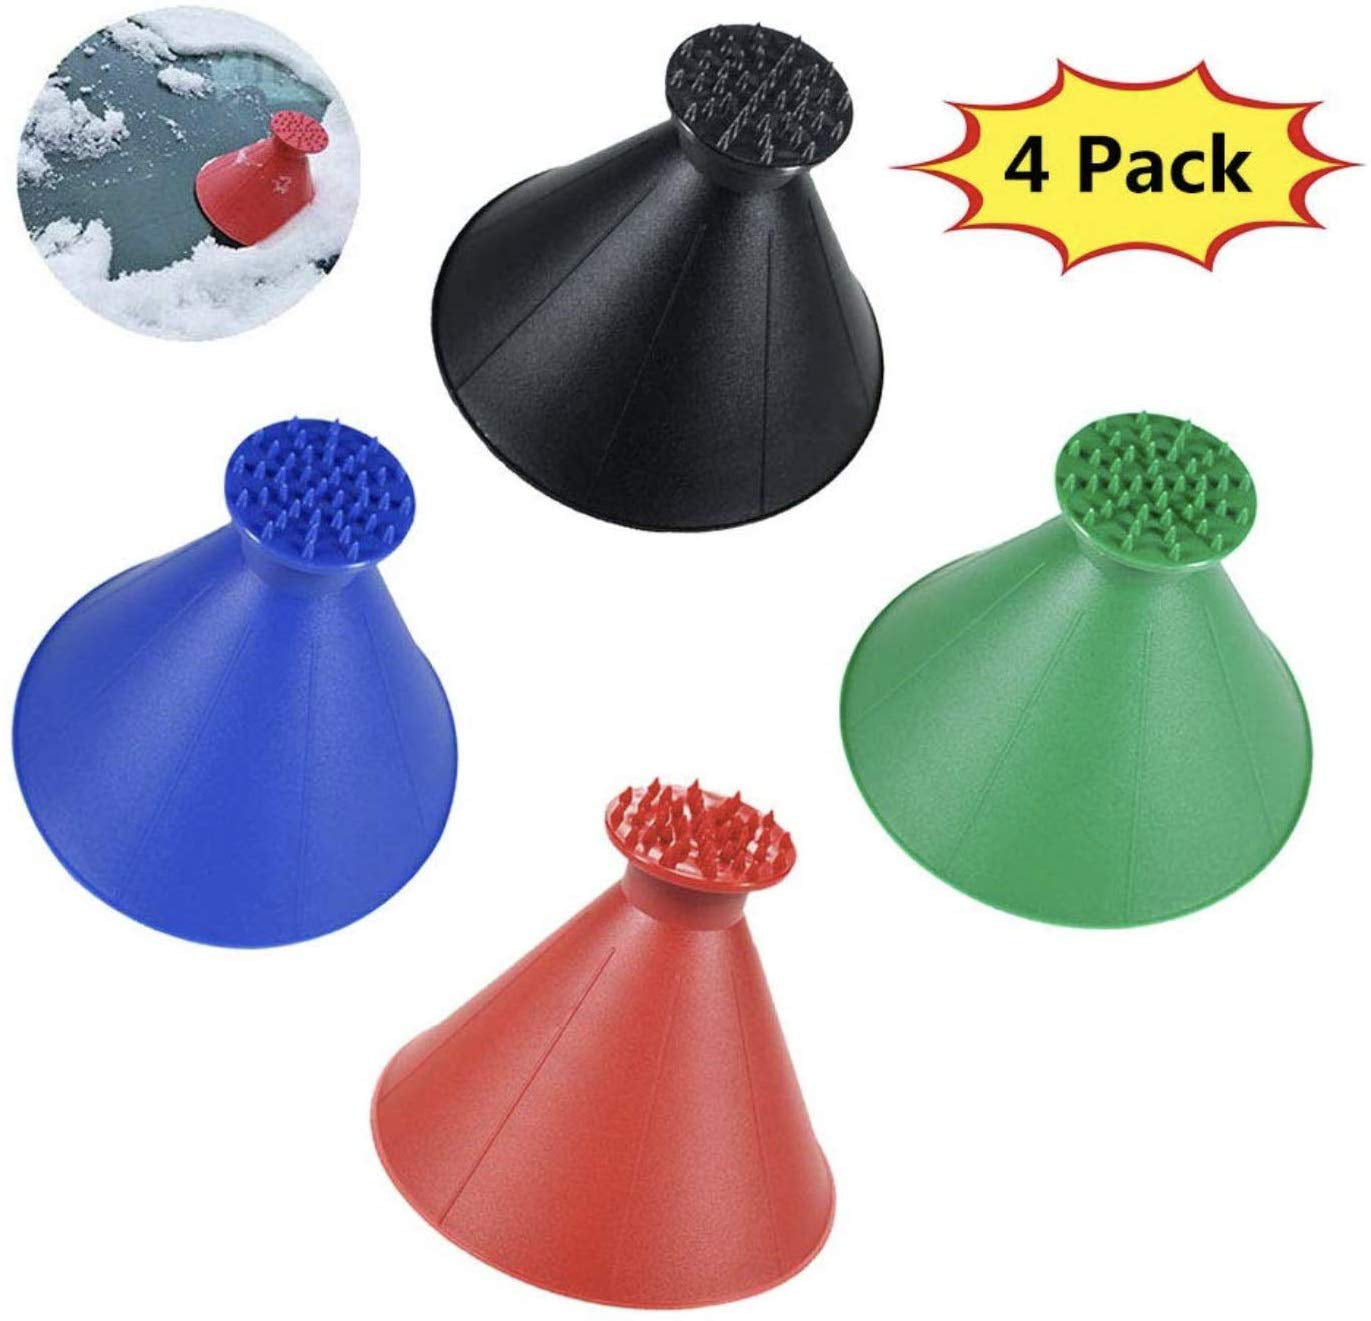 Newest Magical Cone Shaped Car Windshield Ice Scraper Remover Funnel Car Snow Removal Shovel Tool for Car Bus Truck 4 Pack Magic Round Windshield Ice Scraper 